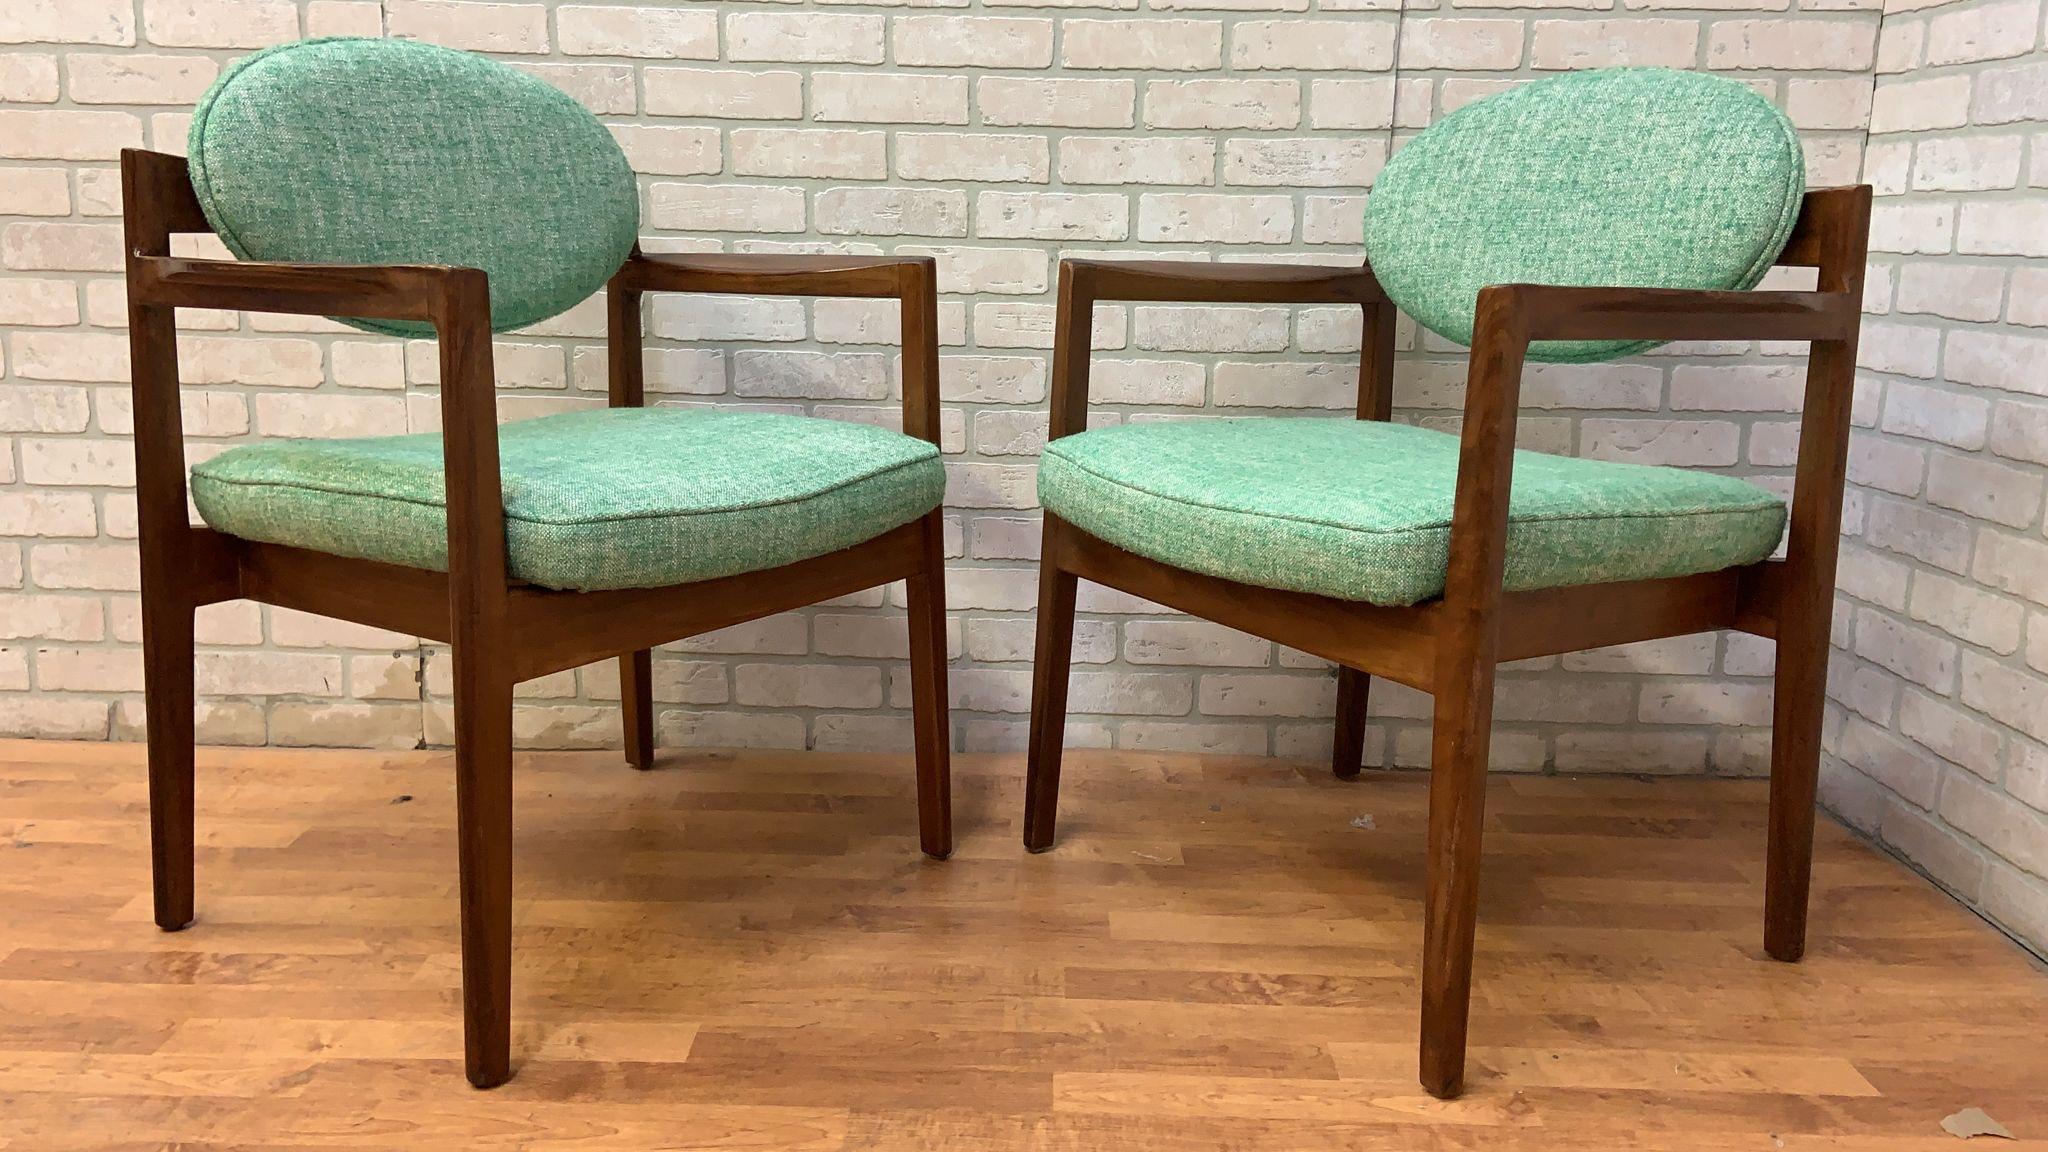 Mid Century Modern Oval-Back Armchairs by Jens Risom Newly Reupholstered in Green Woven Wool-Linen Blend Fabric - Pair

Mid Century Modern Armchairs, known as 